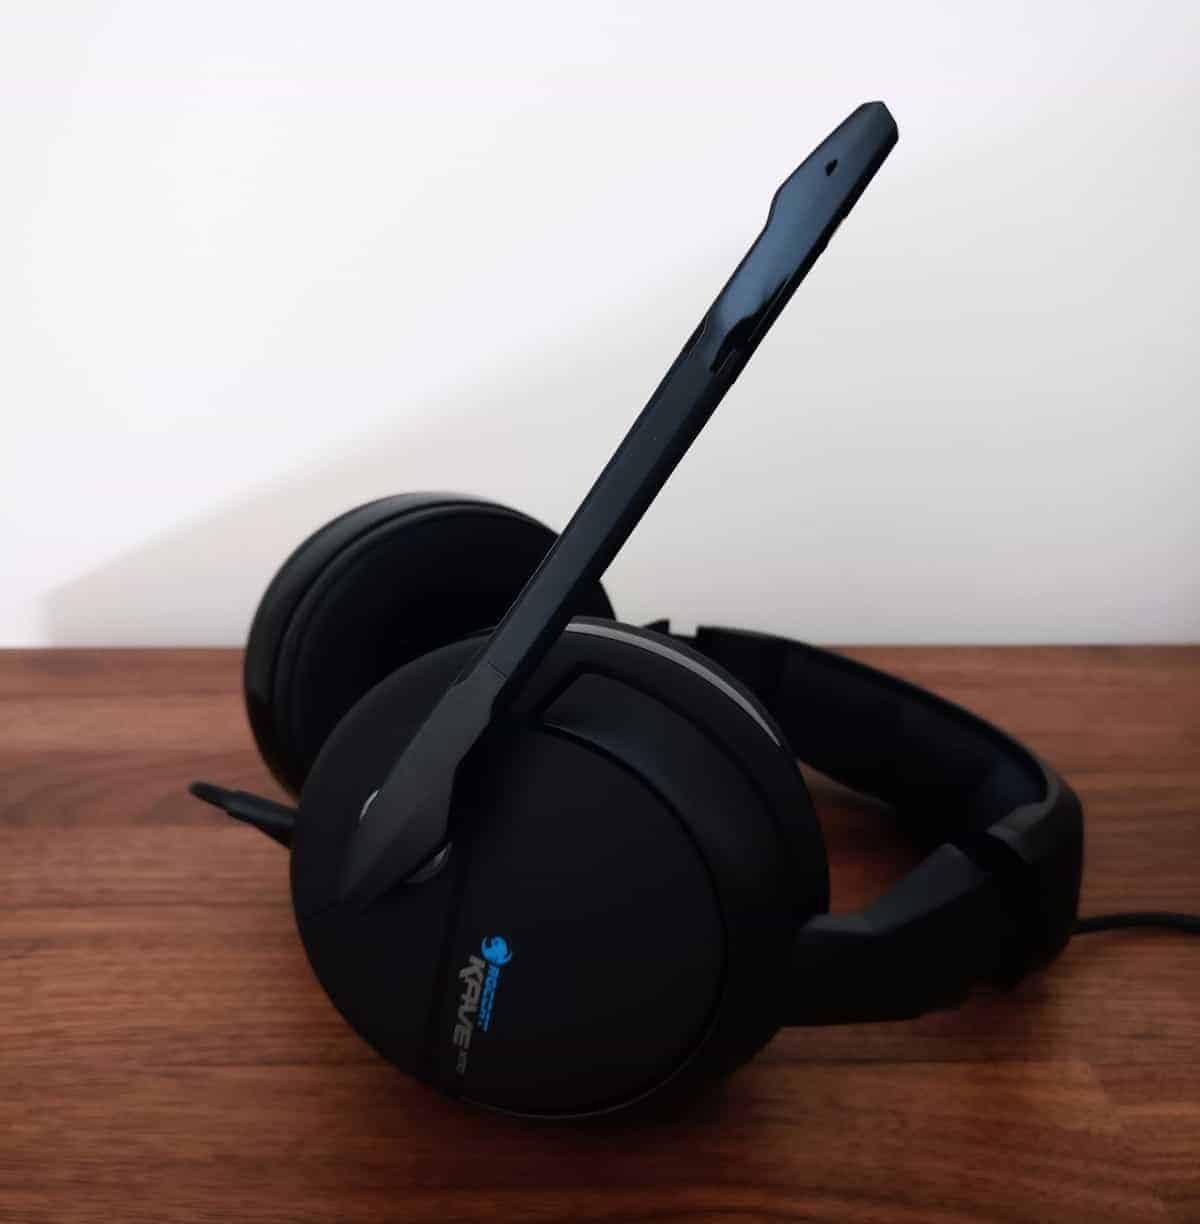 roccat kave headset